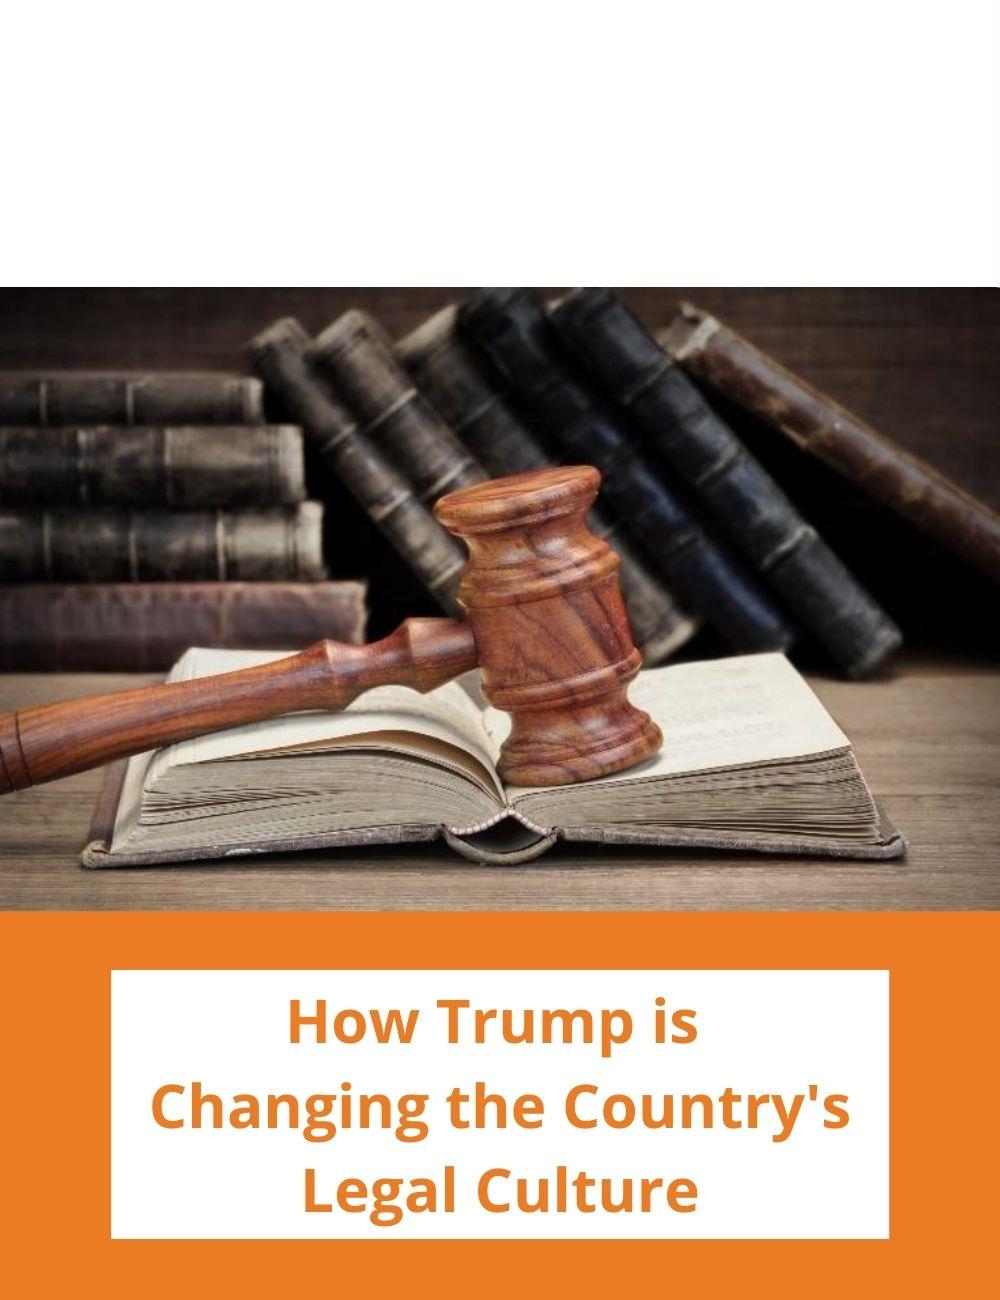 Image: a gavel and law books. Link to related stories. Story headline: How Trump is changing the country's legal culture.